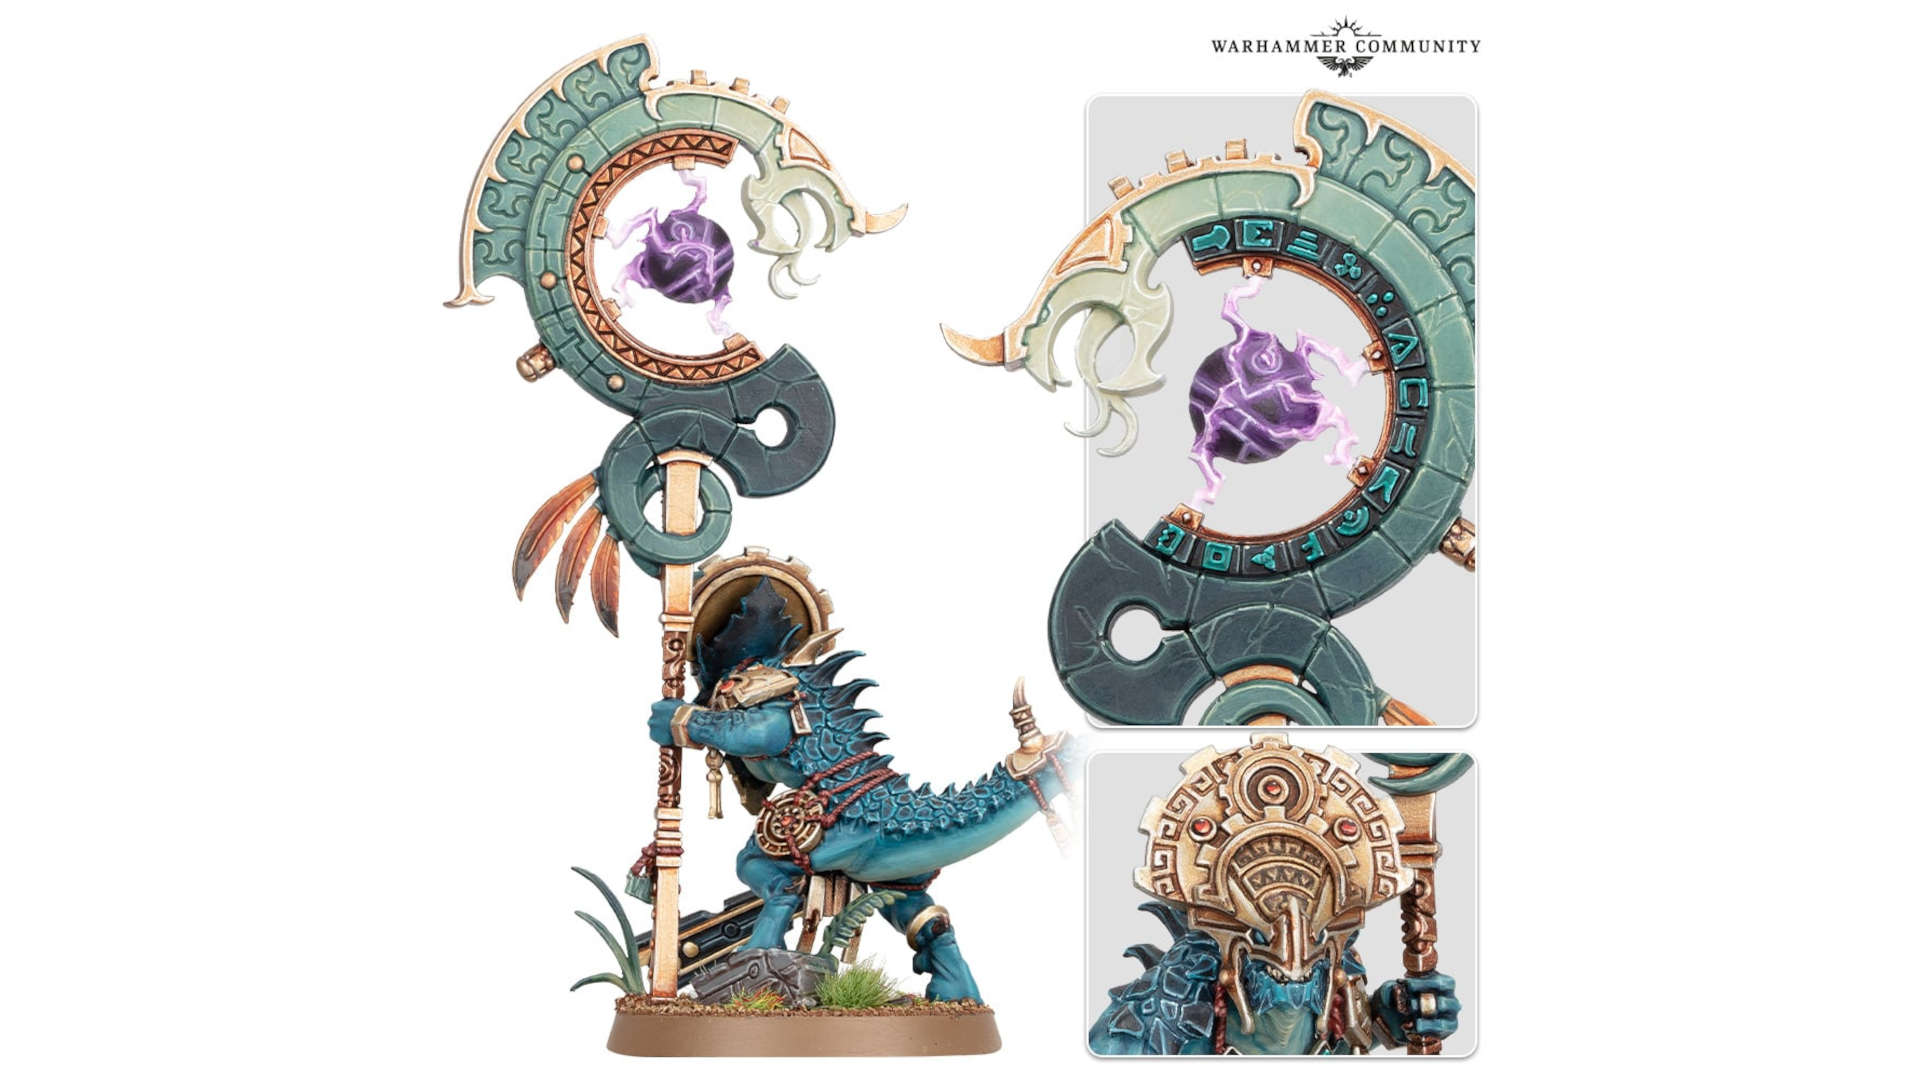 Warhammer Age of Sigmar Seraphon Saurus Astrolith Bearer details - a dinosaur man with a magnificent golden head crown, holding aloft a huge serpentine banner pole - view from behind, closeup on floating energy orb inside banner, detail of headdress